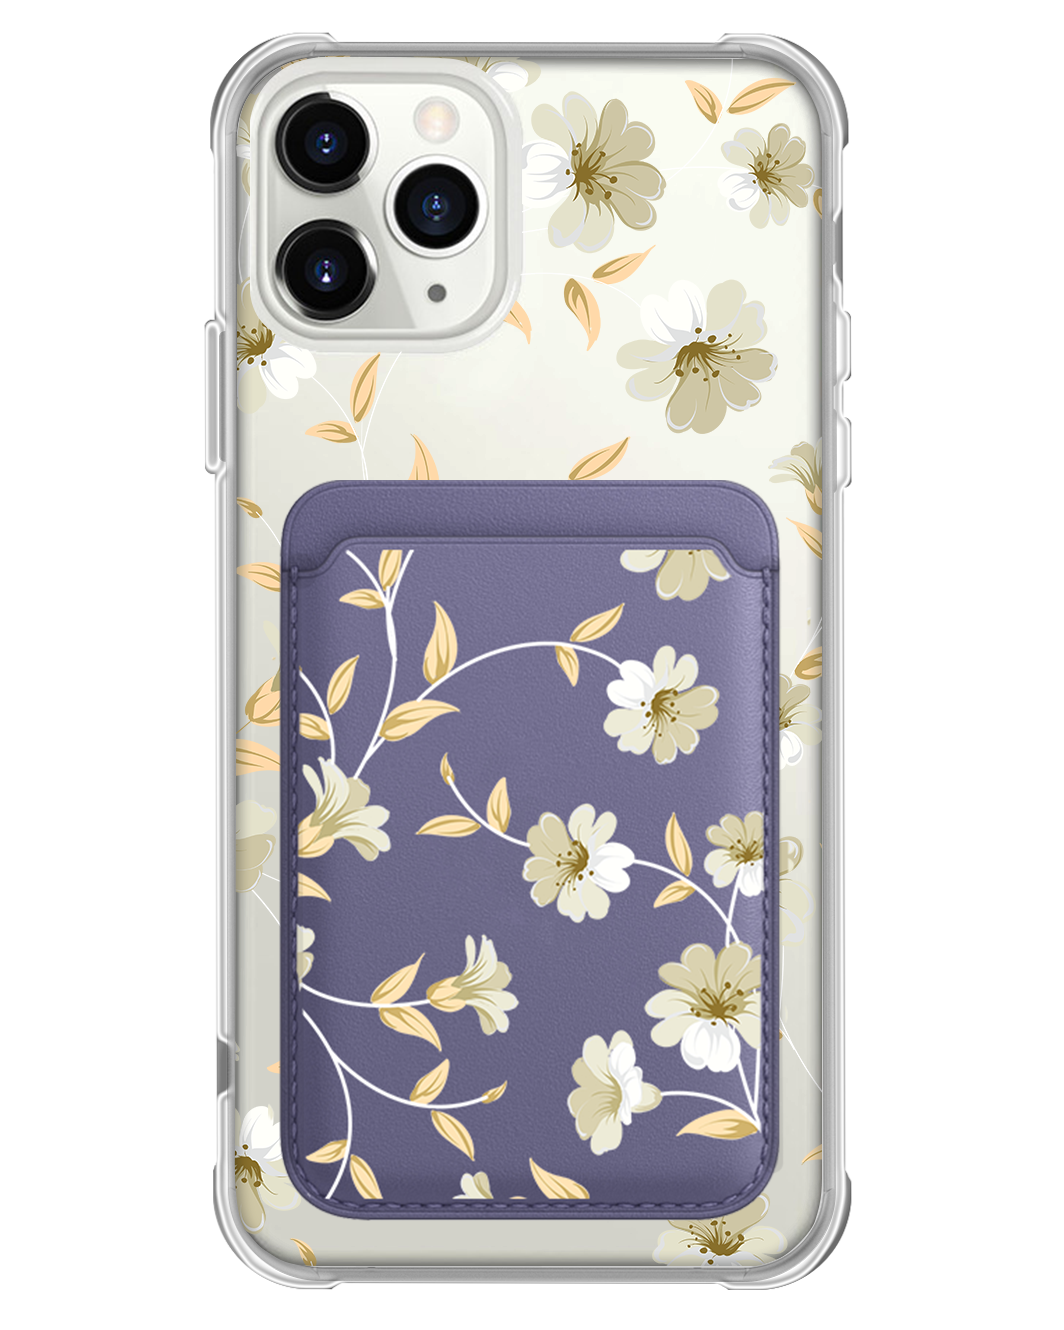 iPhone Magnetic Wallet Case - White Magnolia